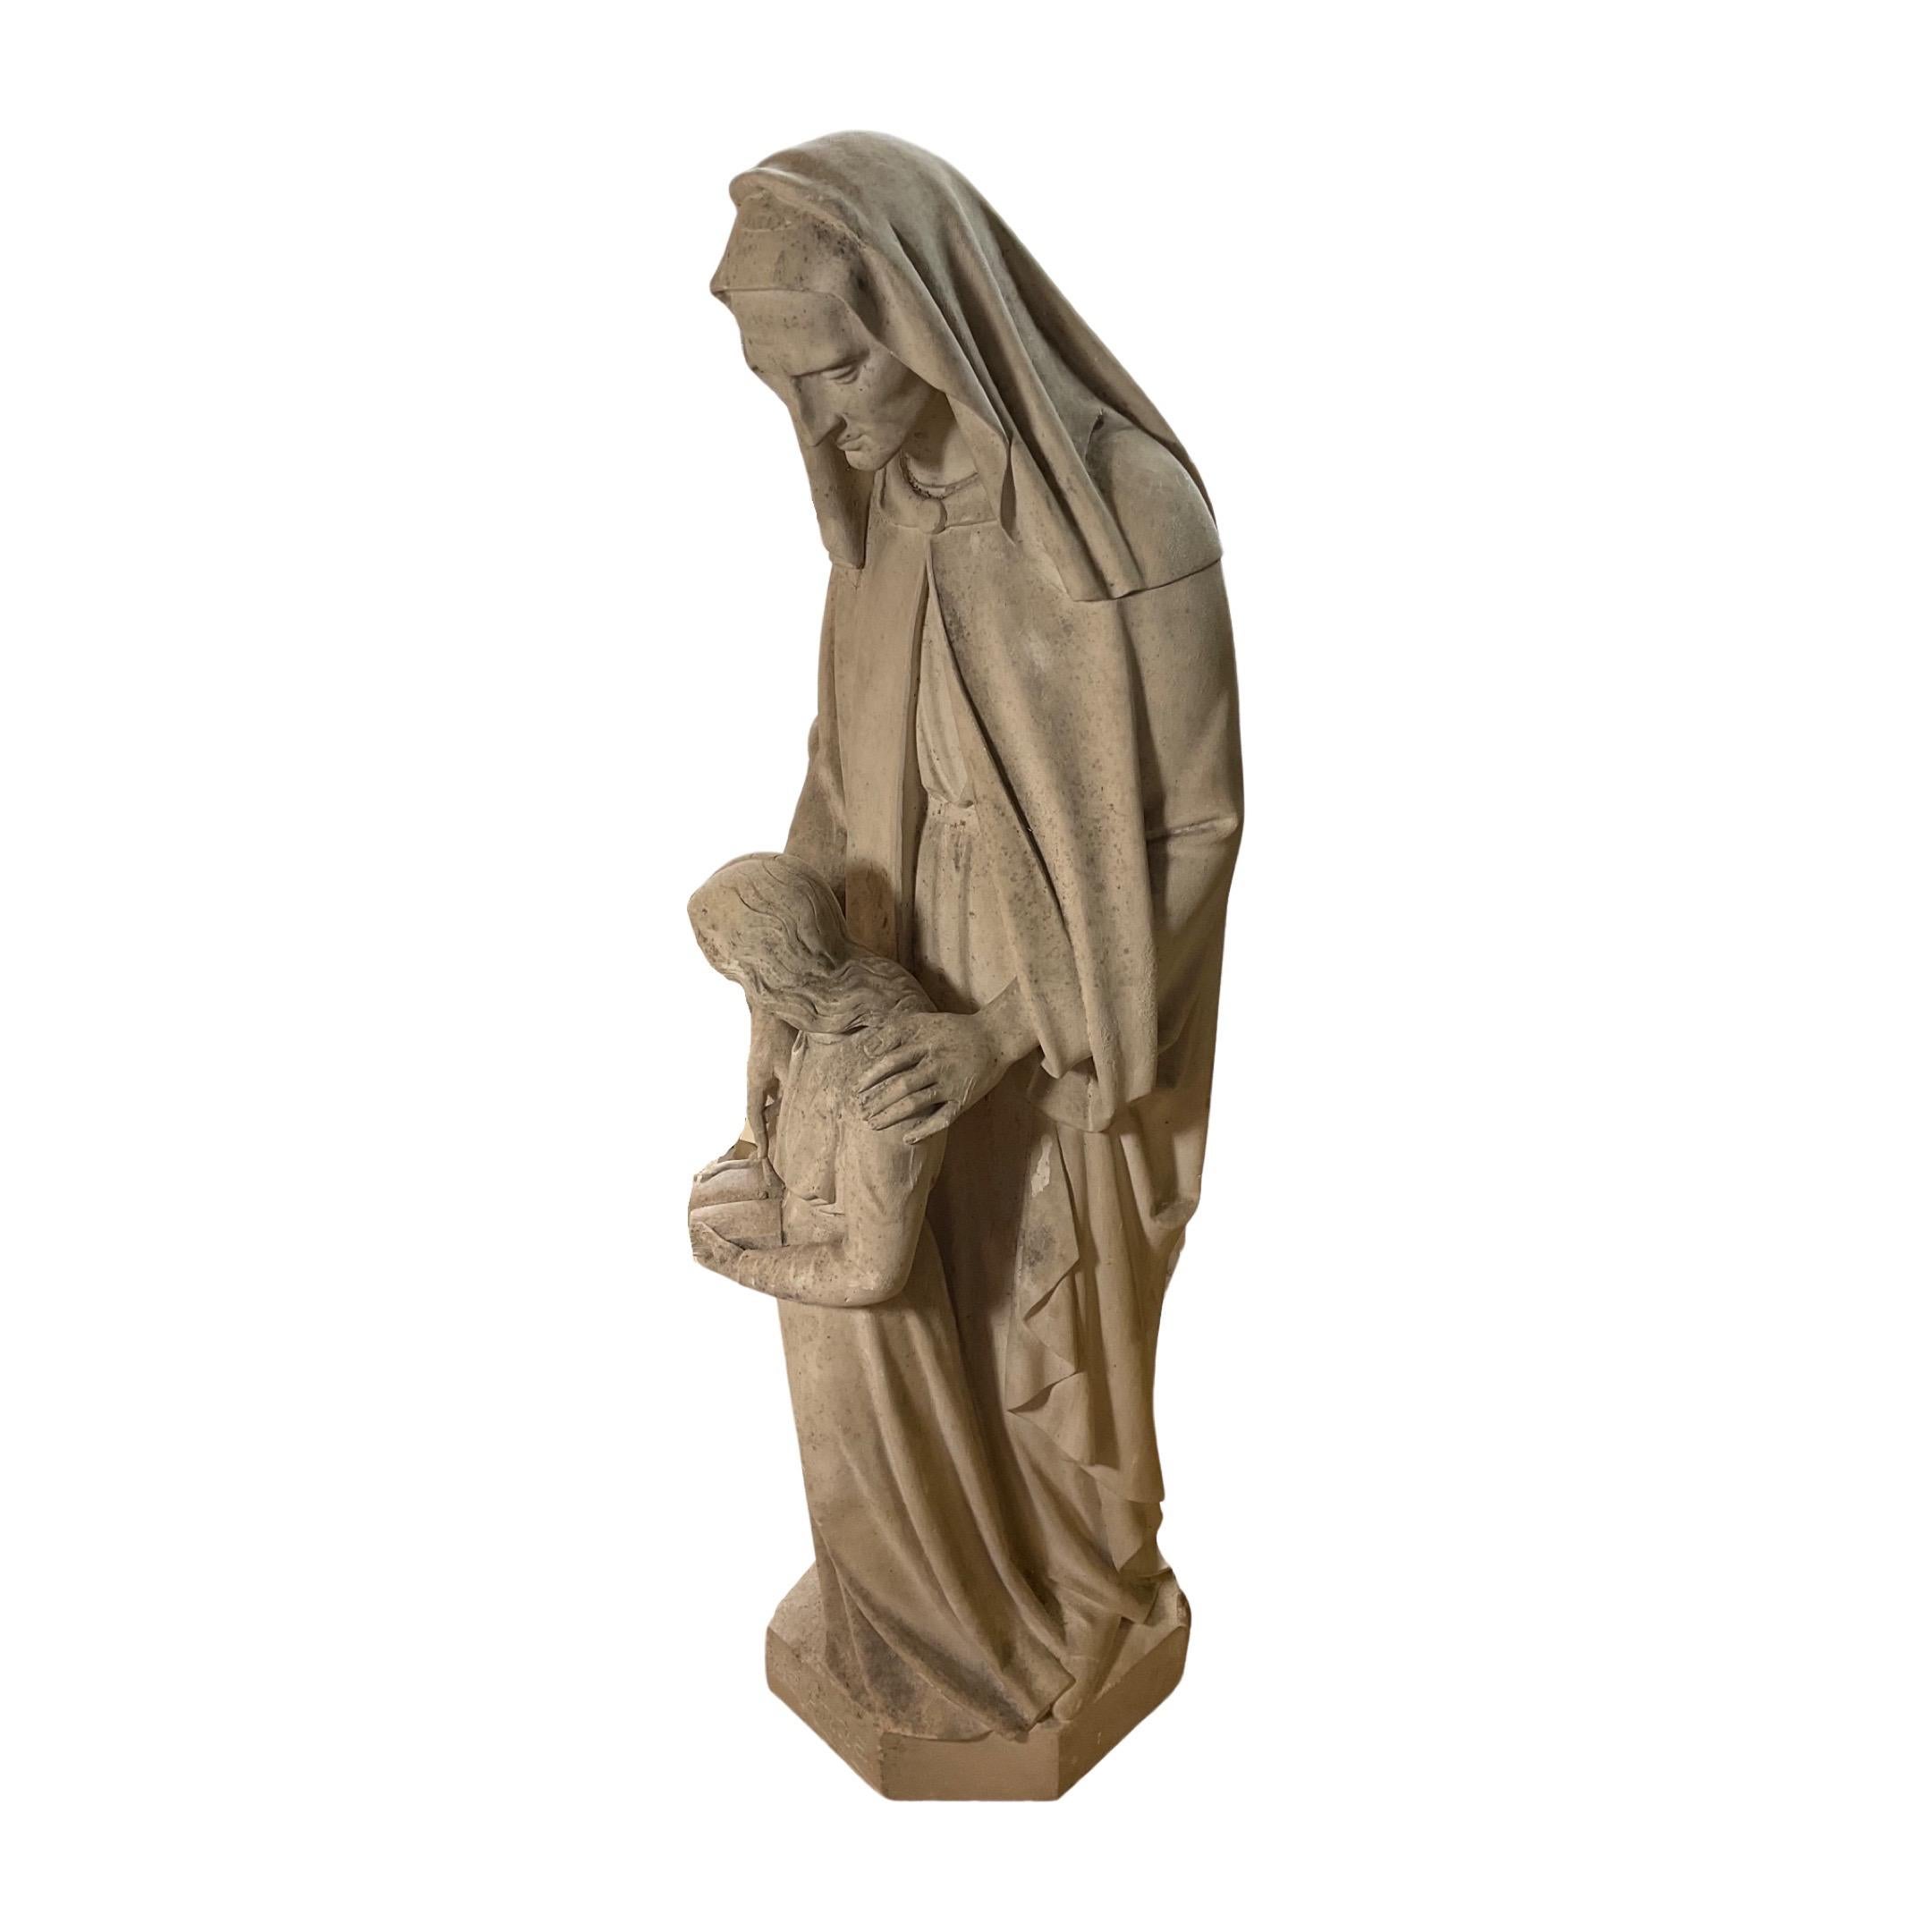 This 17th century French Limestone Saint Sculpture demonstrates remarkable artistry, skilfully sculpted from French Limestone to ensure its aesthetic accuracy.